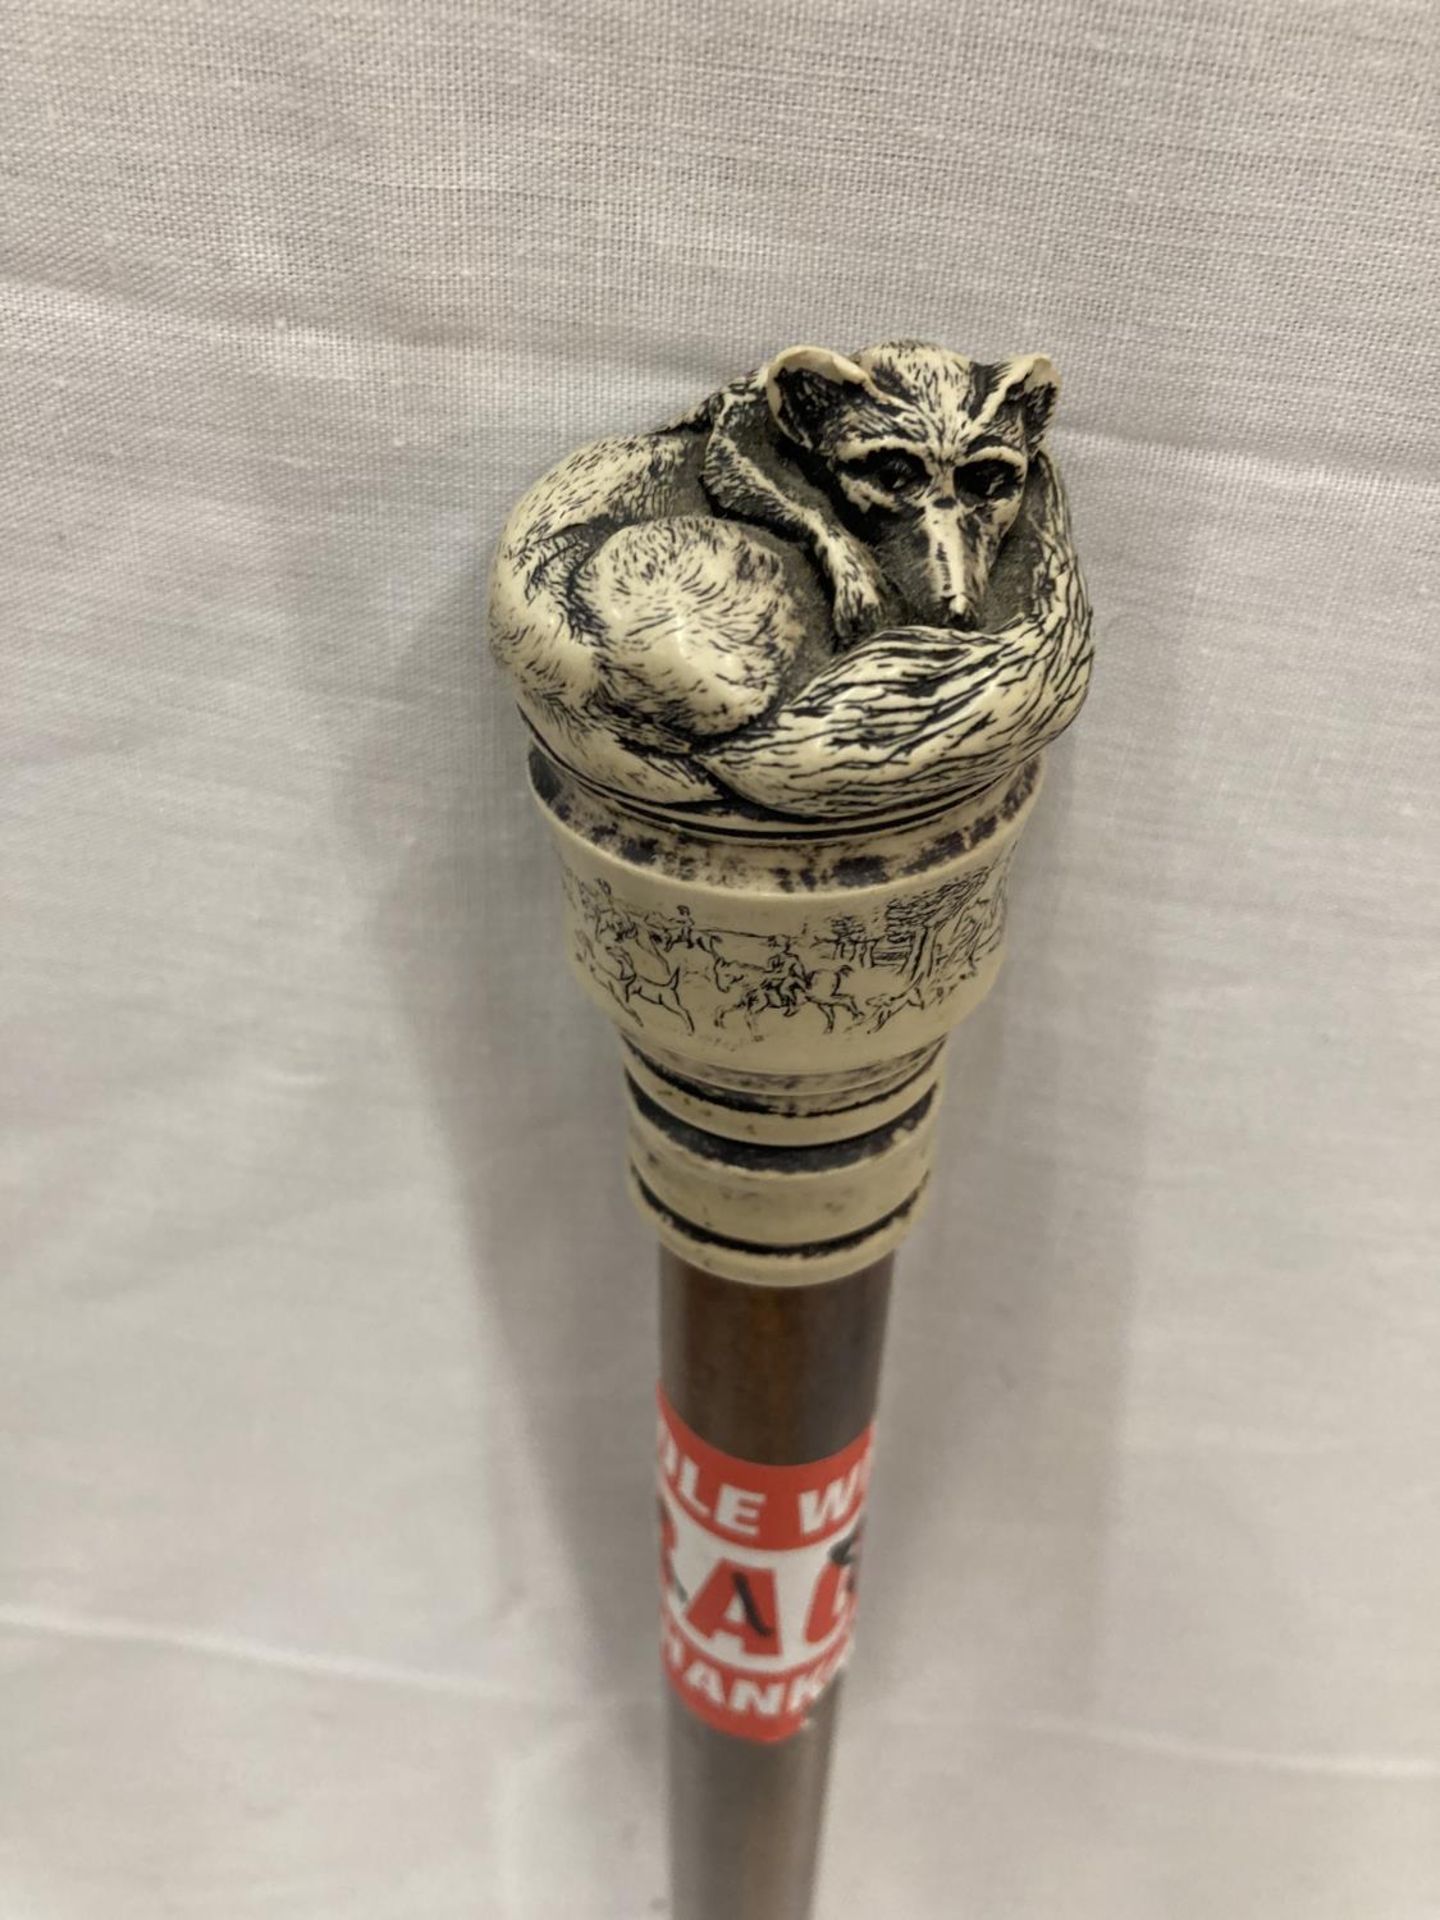 A WALKING CANE WITH A FOX FINIAL AND ENGRAVED HUNTING SCENE - Image 2 of 6